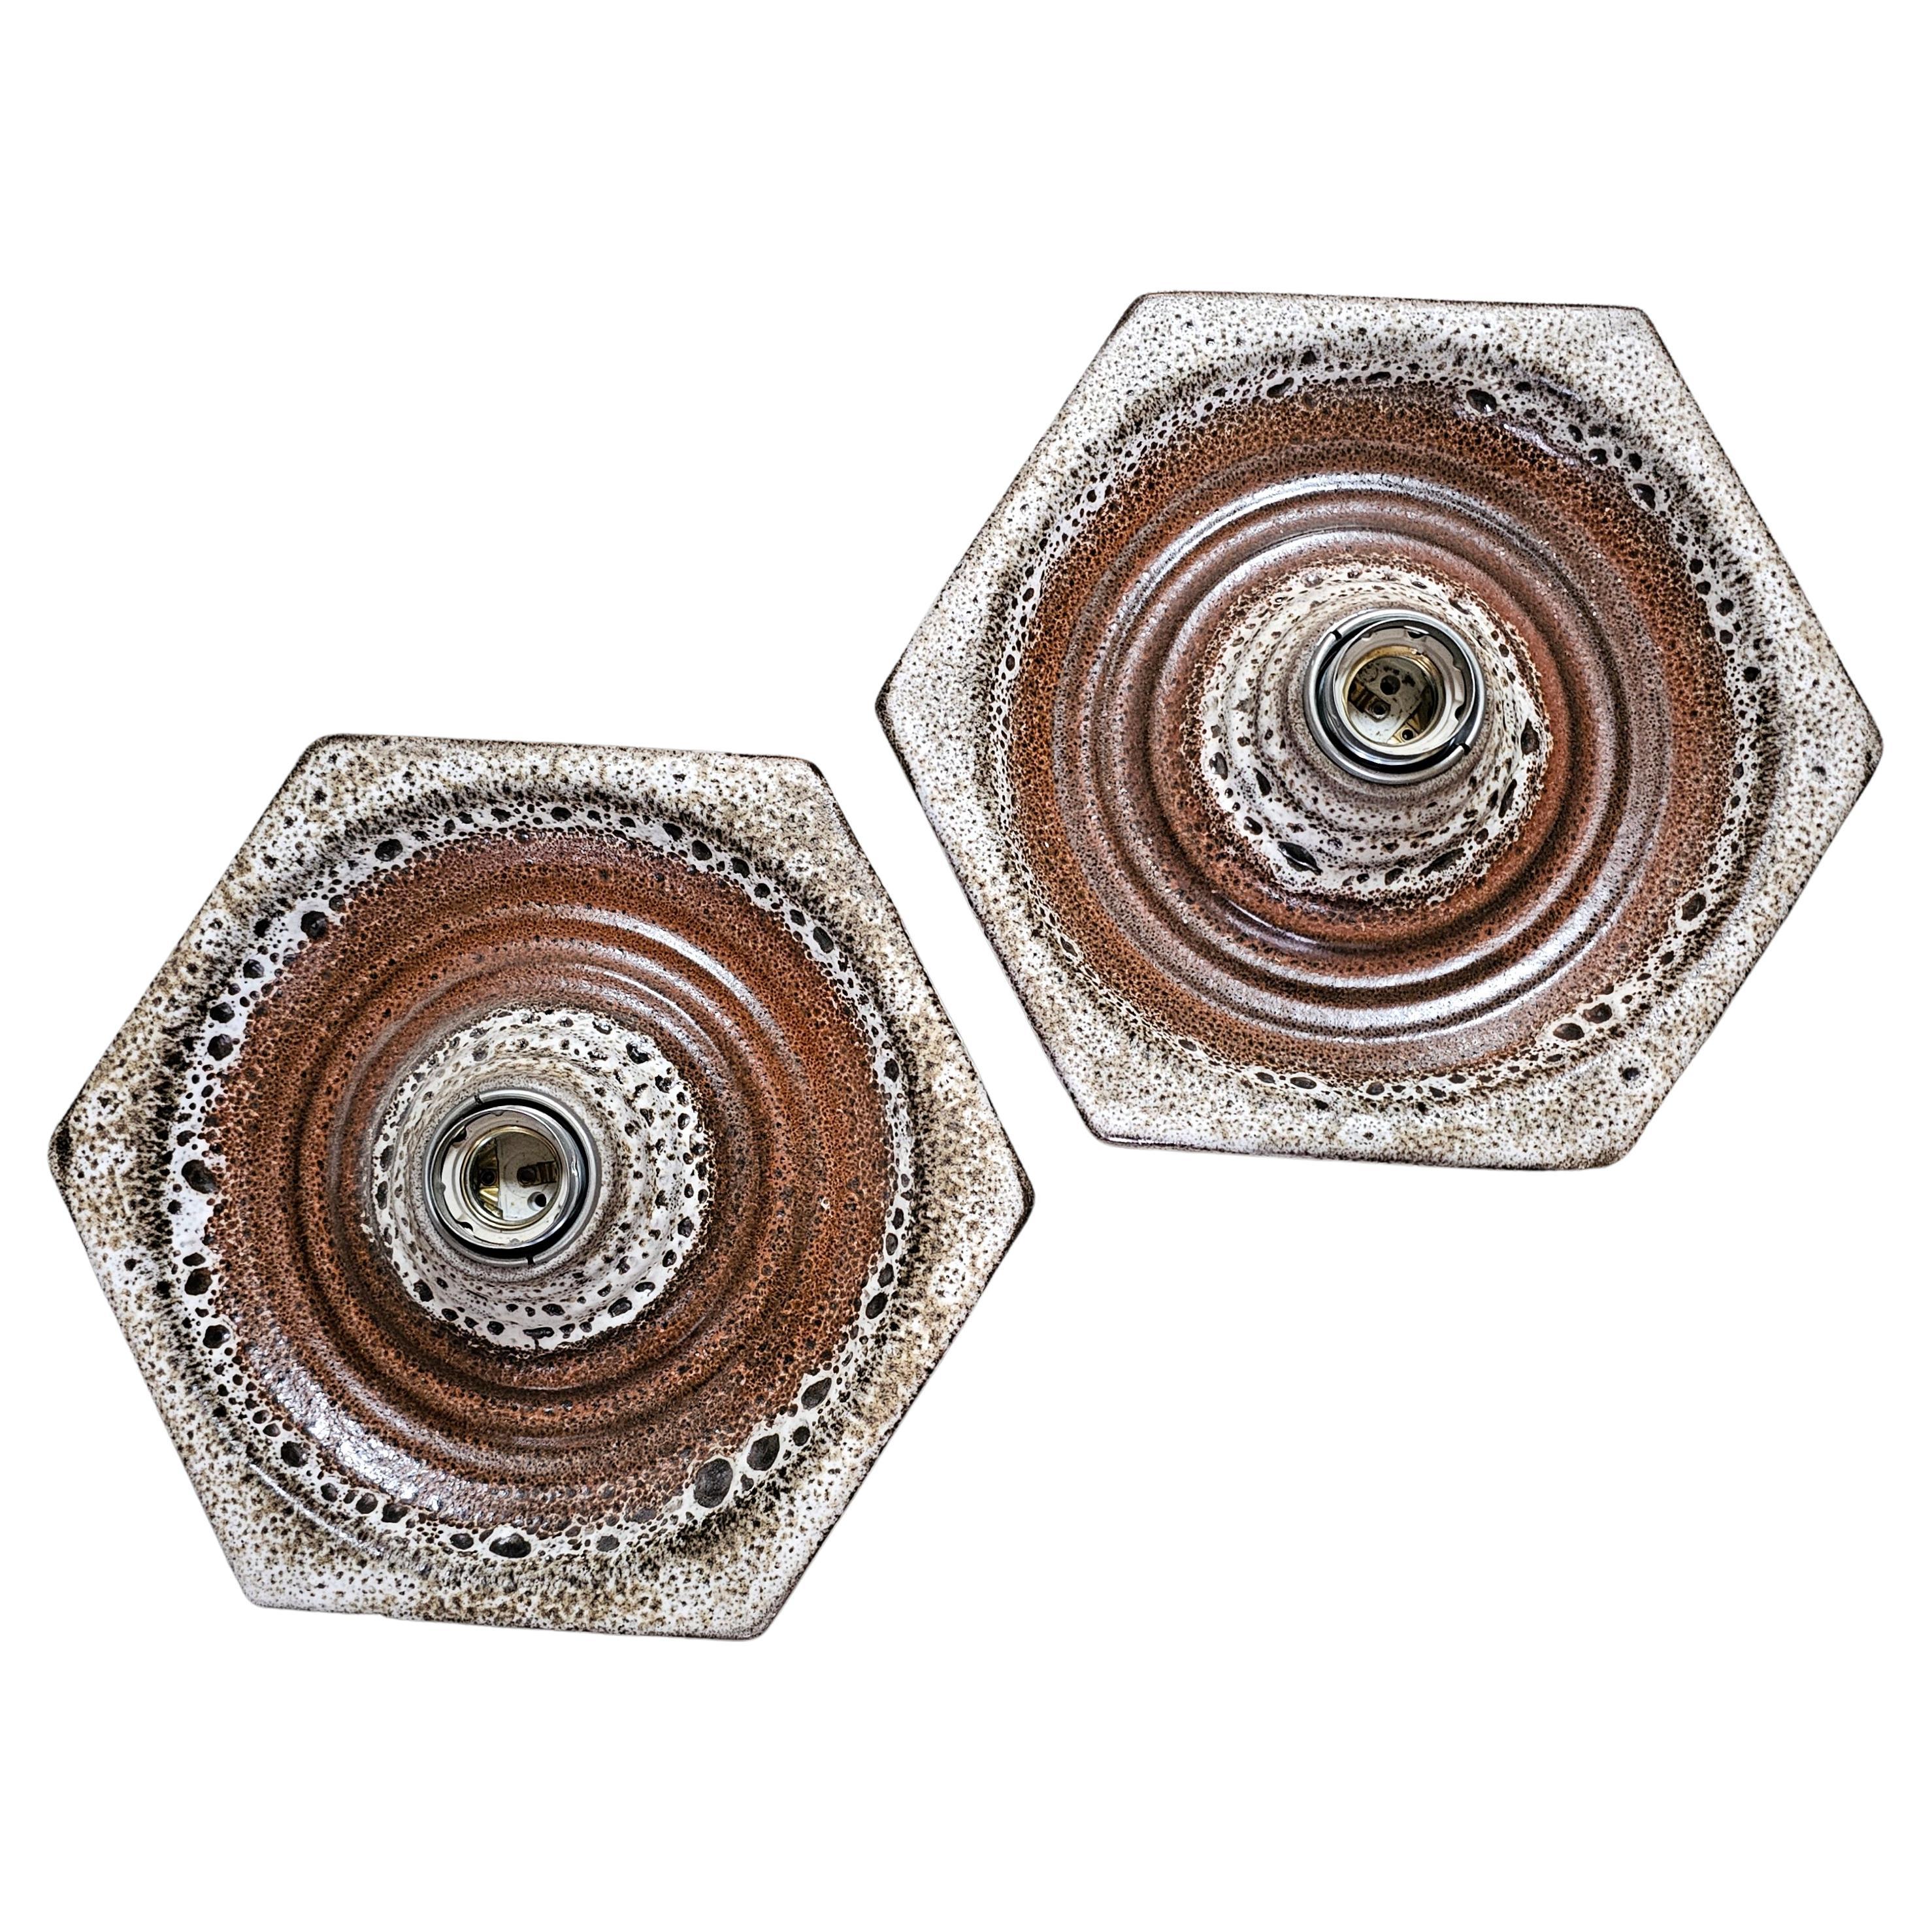 Pair of Mid Century Modern Hexagonal Fat Lava Sconces, West Germany 1970s